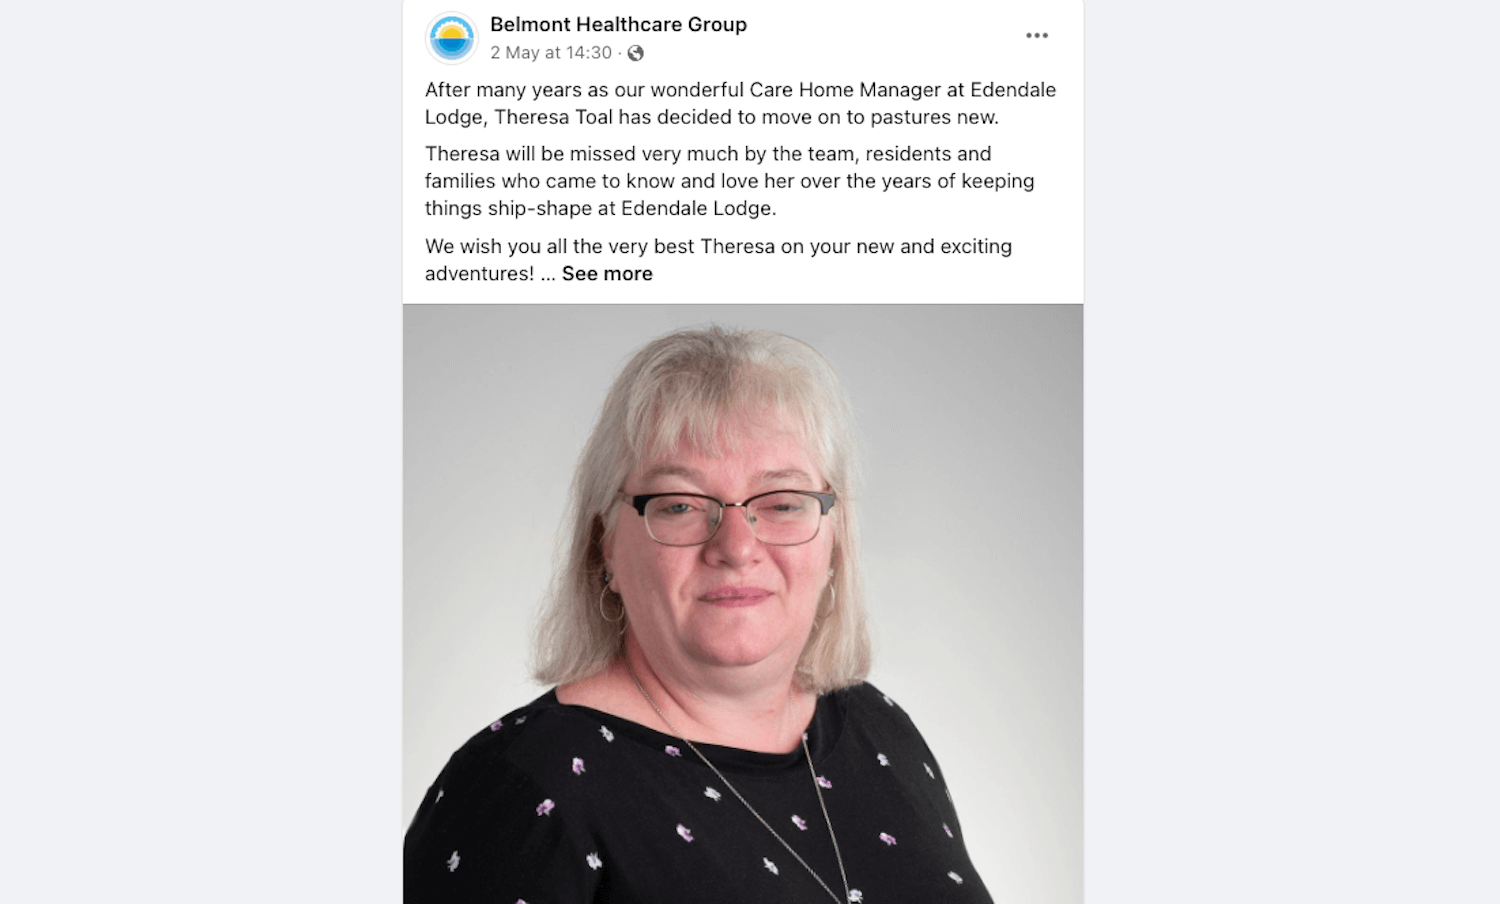 Screenshot of a Facebook post from Belmont Healthcare Group with a block of text and a portrait photo of a woman with glasses smiling.